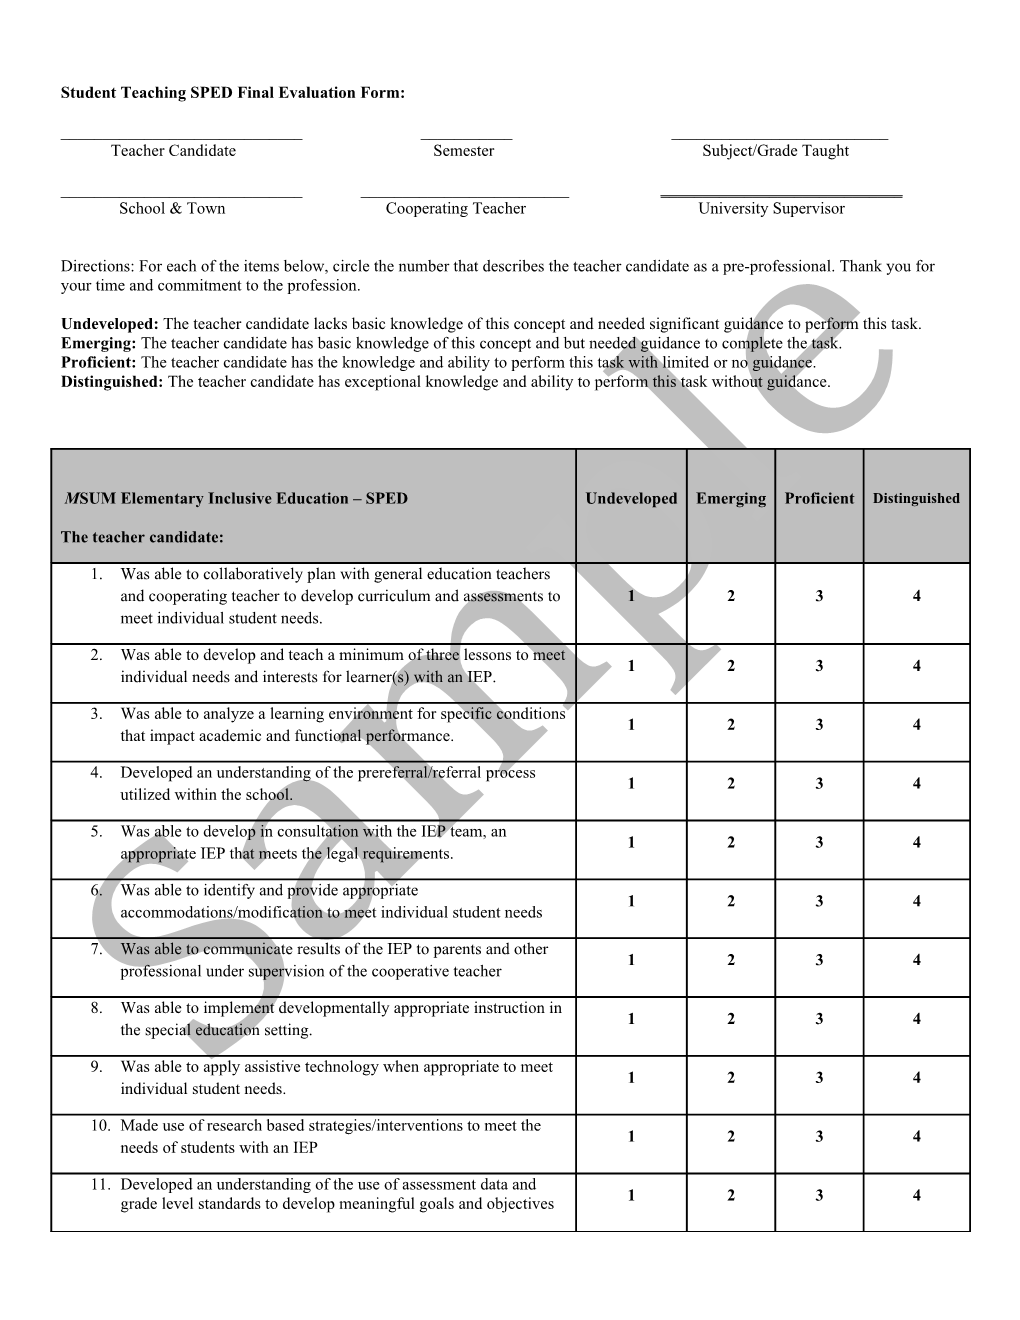 Student Teaching Spedfinal Evaluation Form